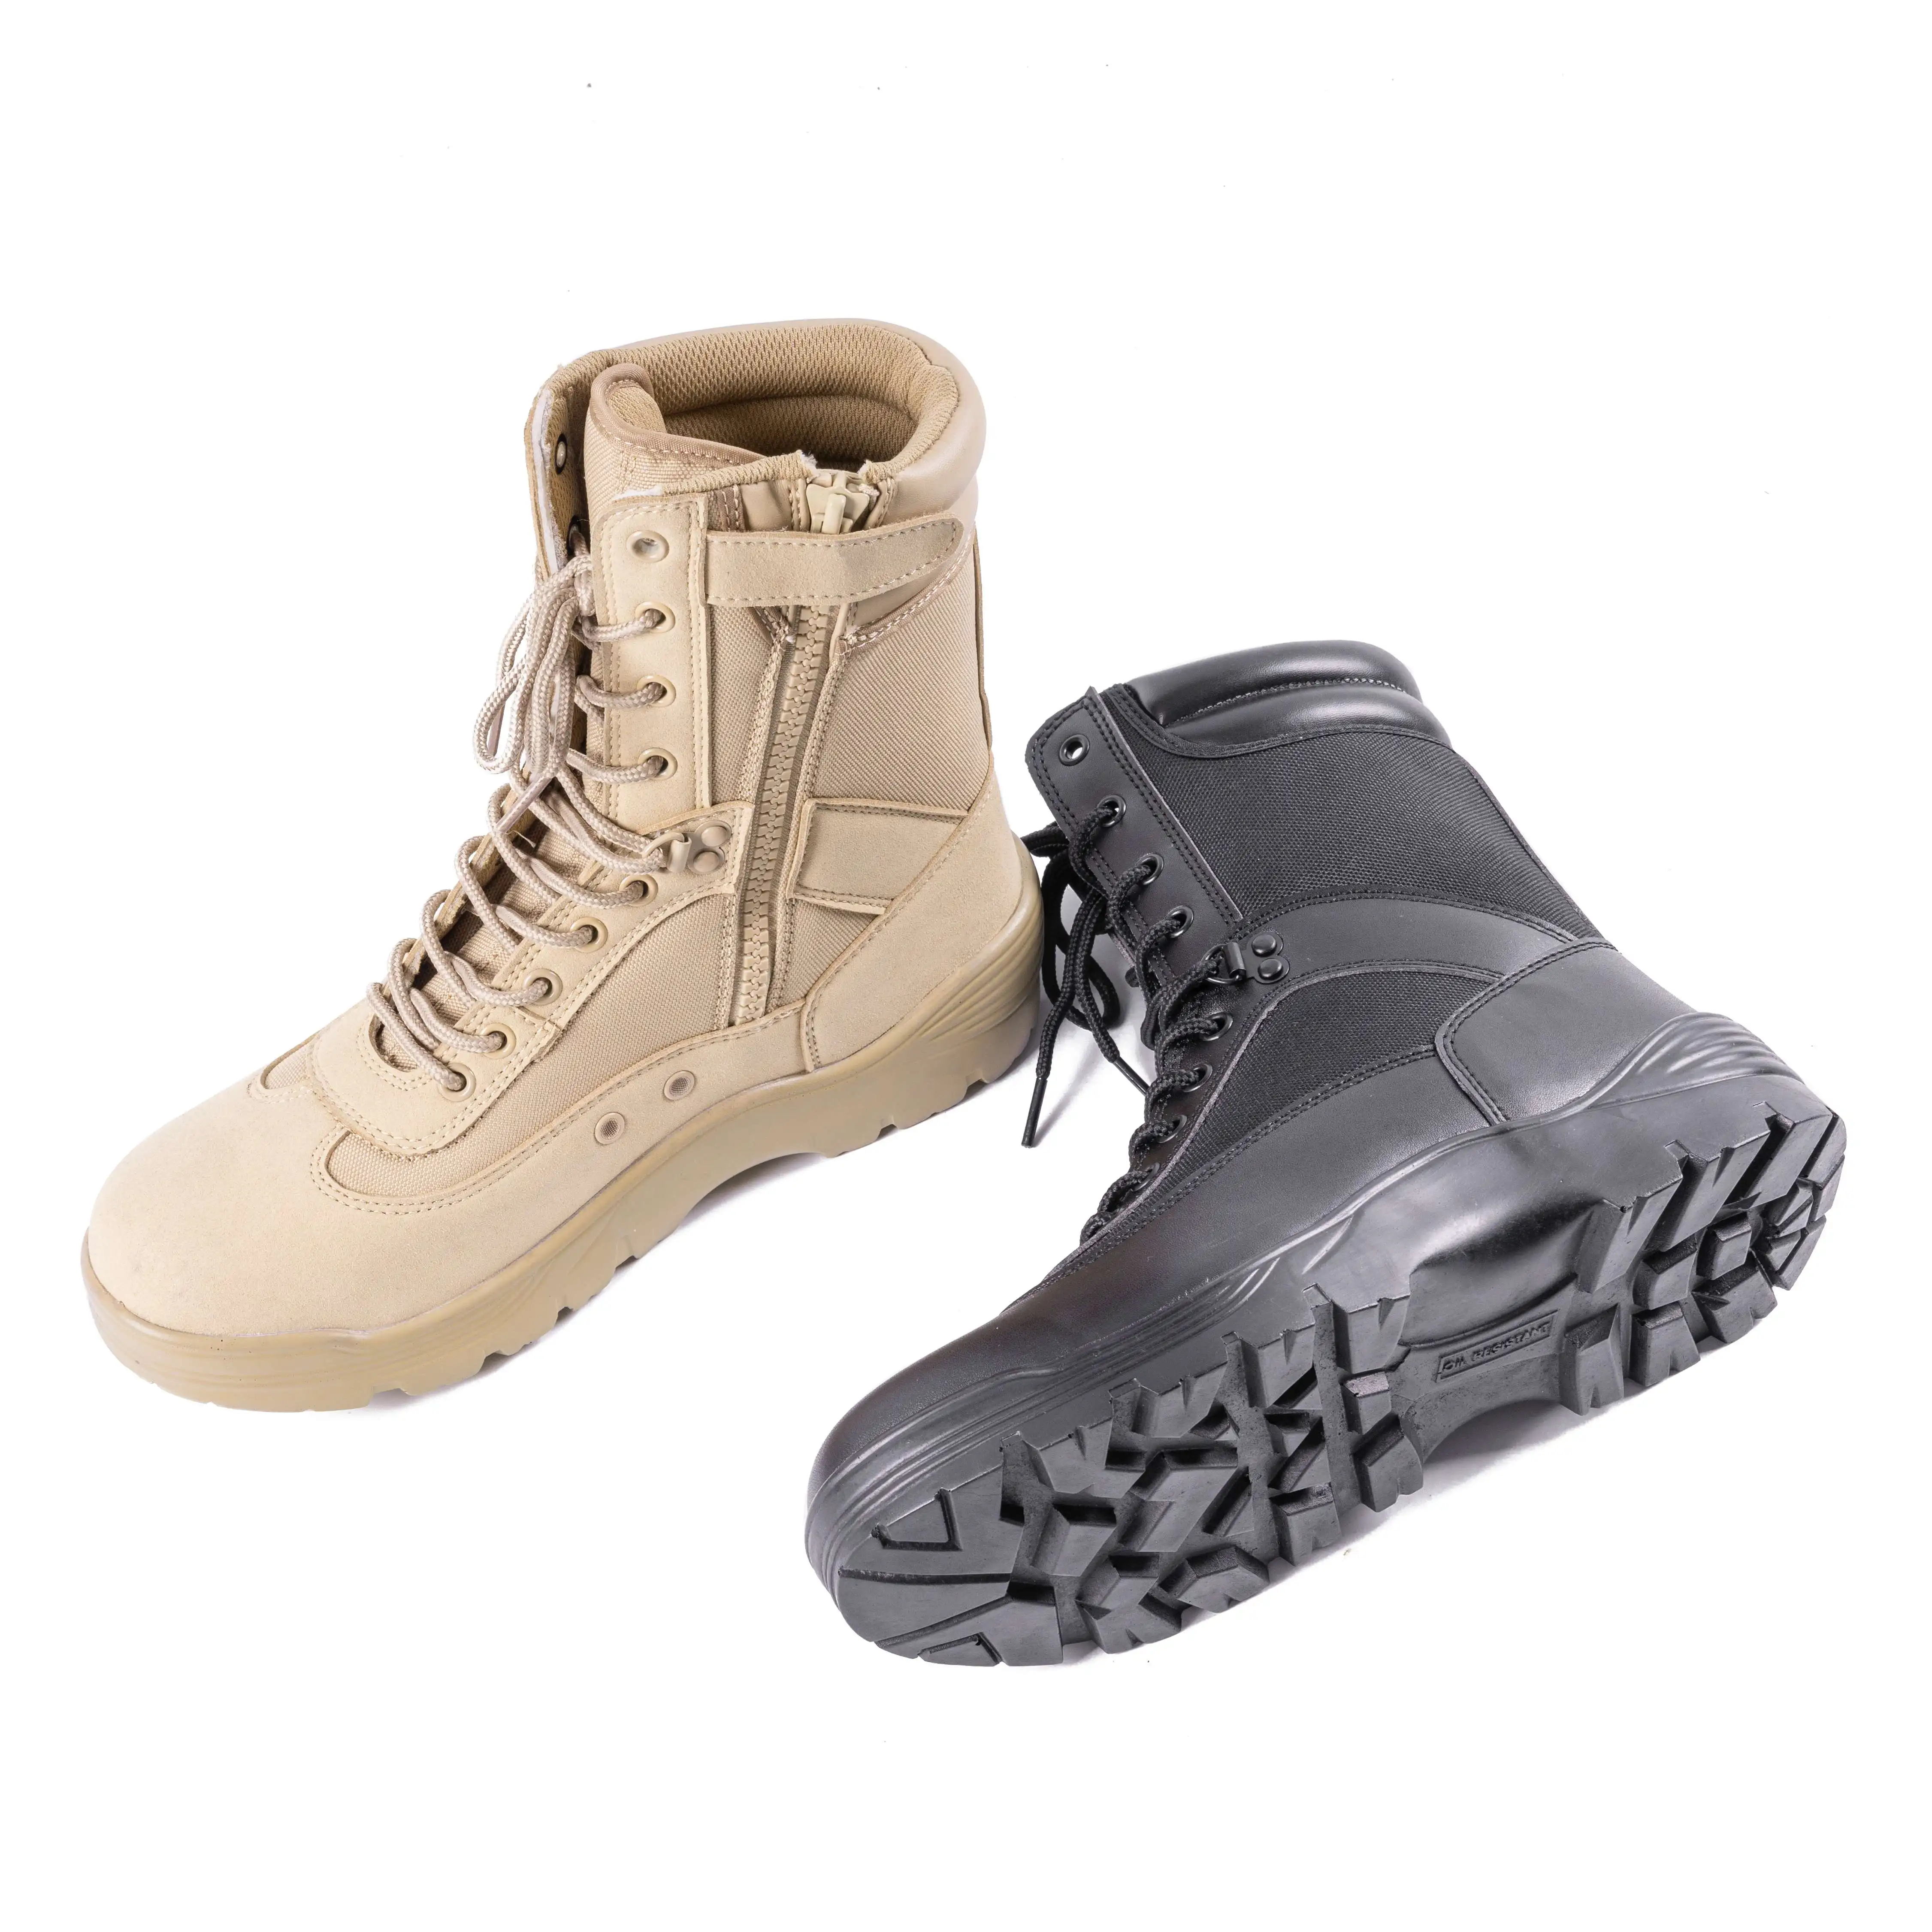 Waterproof Black Military Boot Hiking Boots Tactical Training Shoes PU Outsole Boots for men